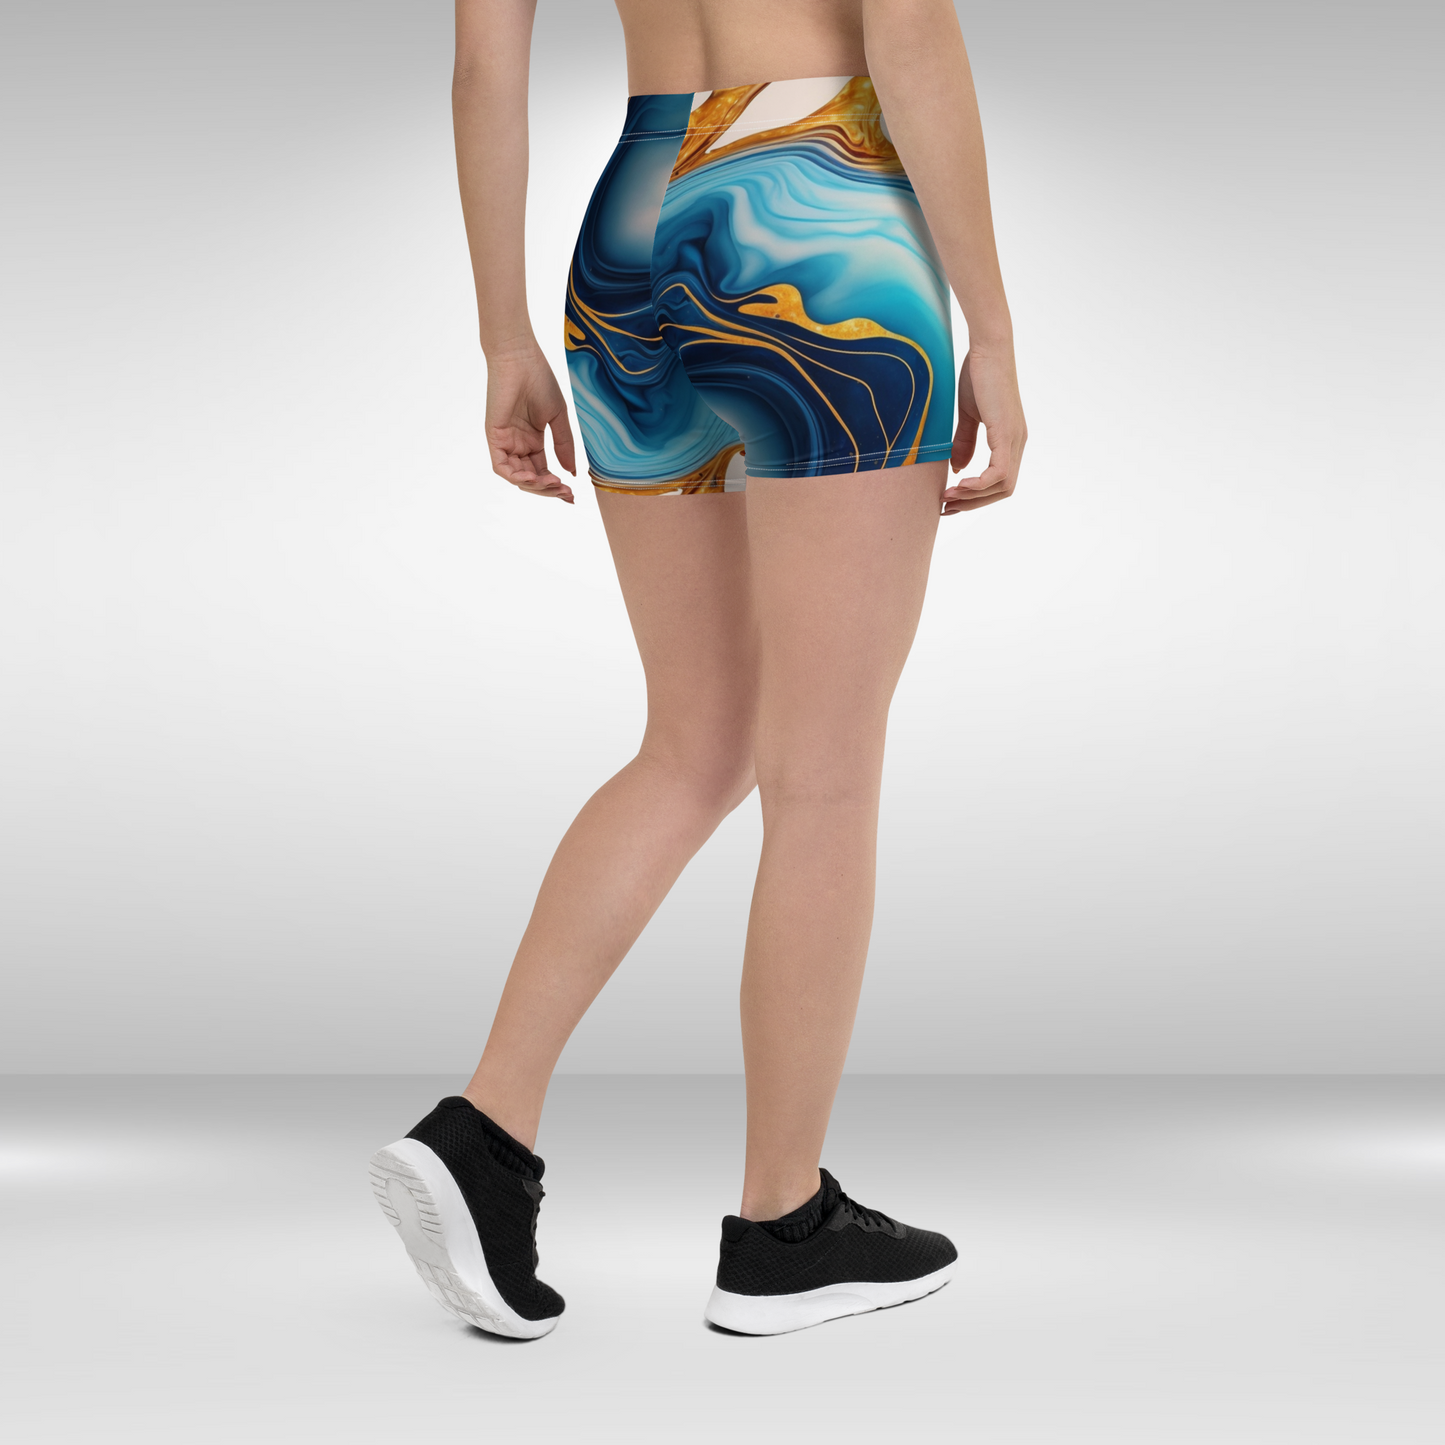 Women Mid Waist Shorts - Blue and Gold Abstract Print